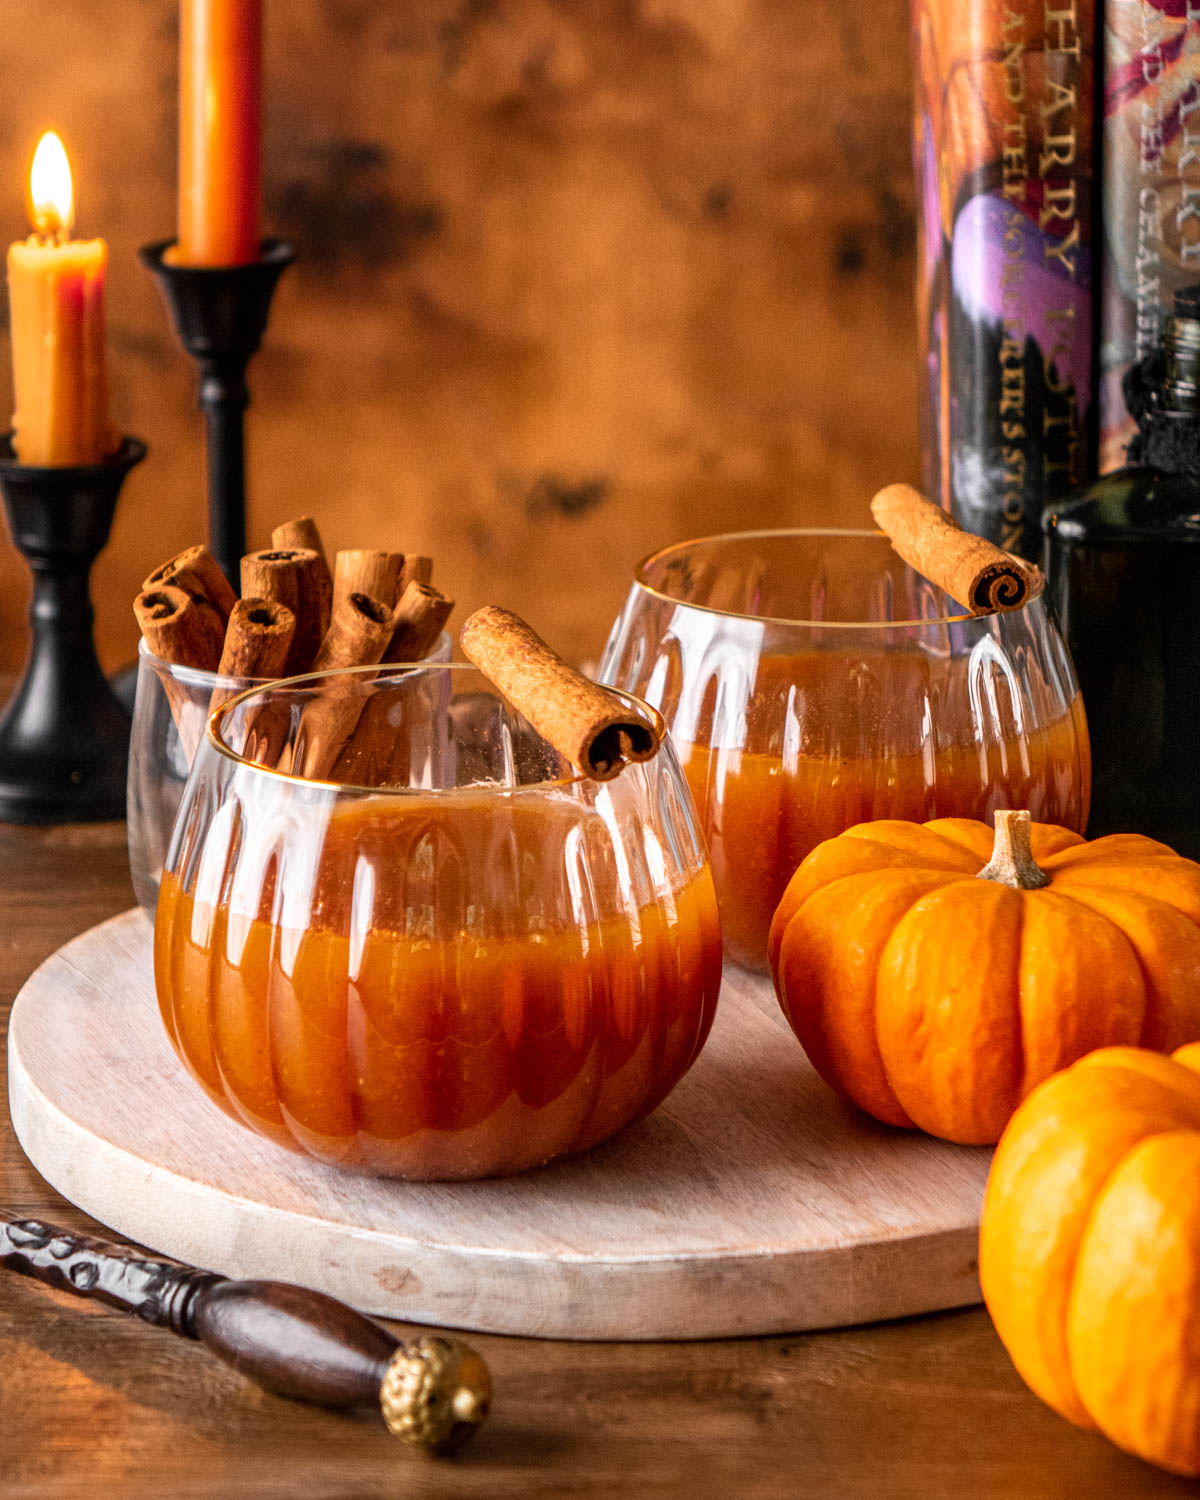 two glasses of pumpkin juice on a wood board with pumpkins, candles and books around